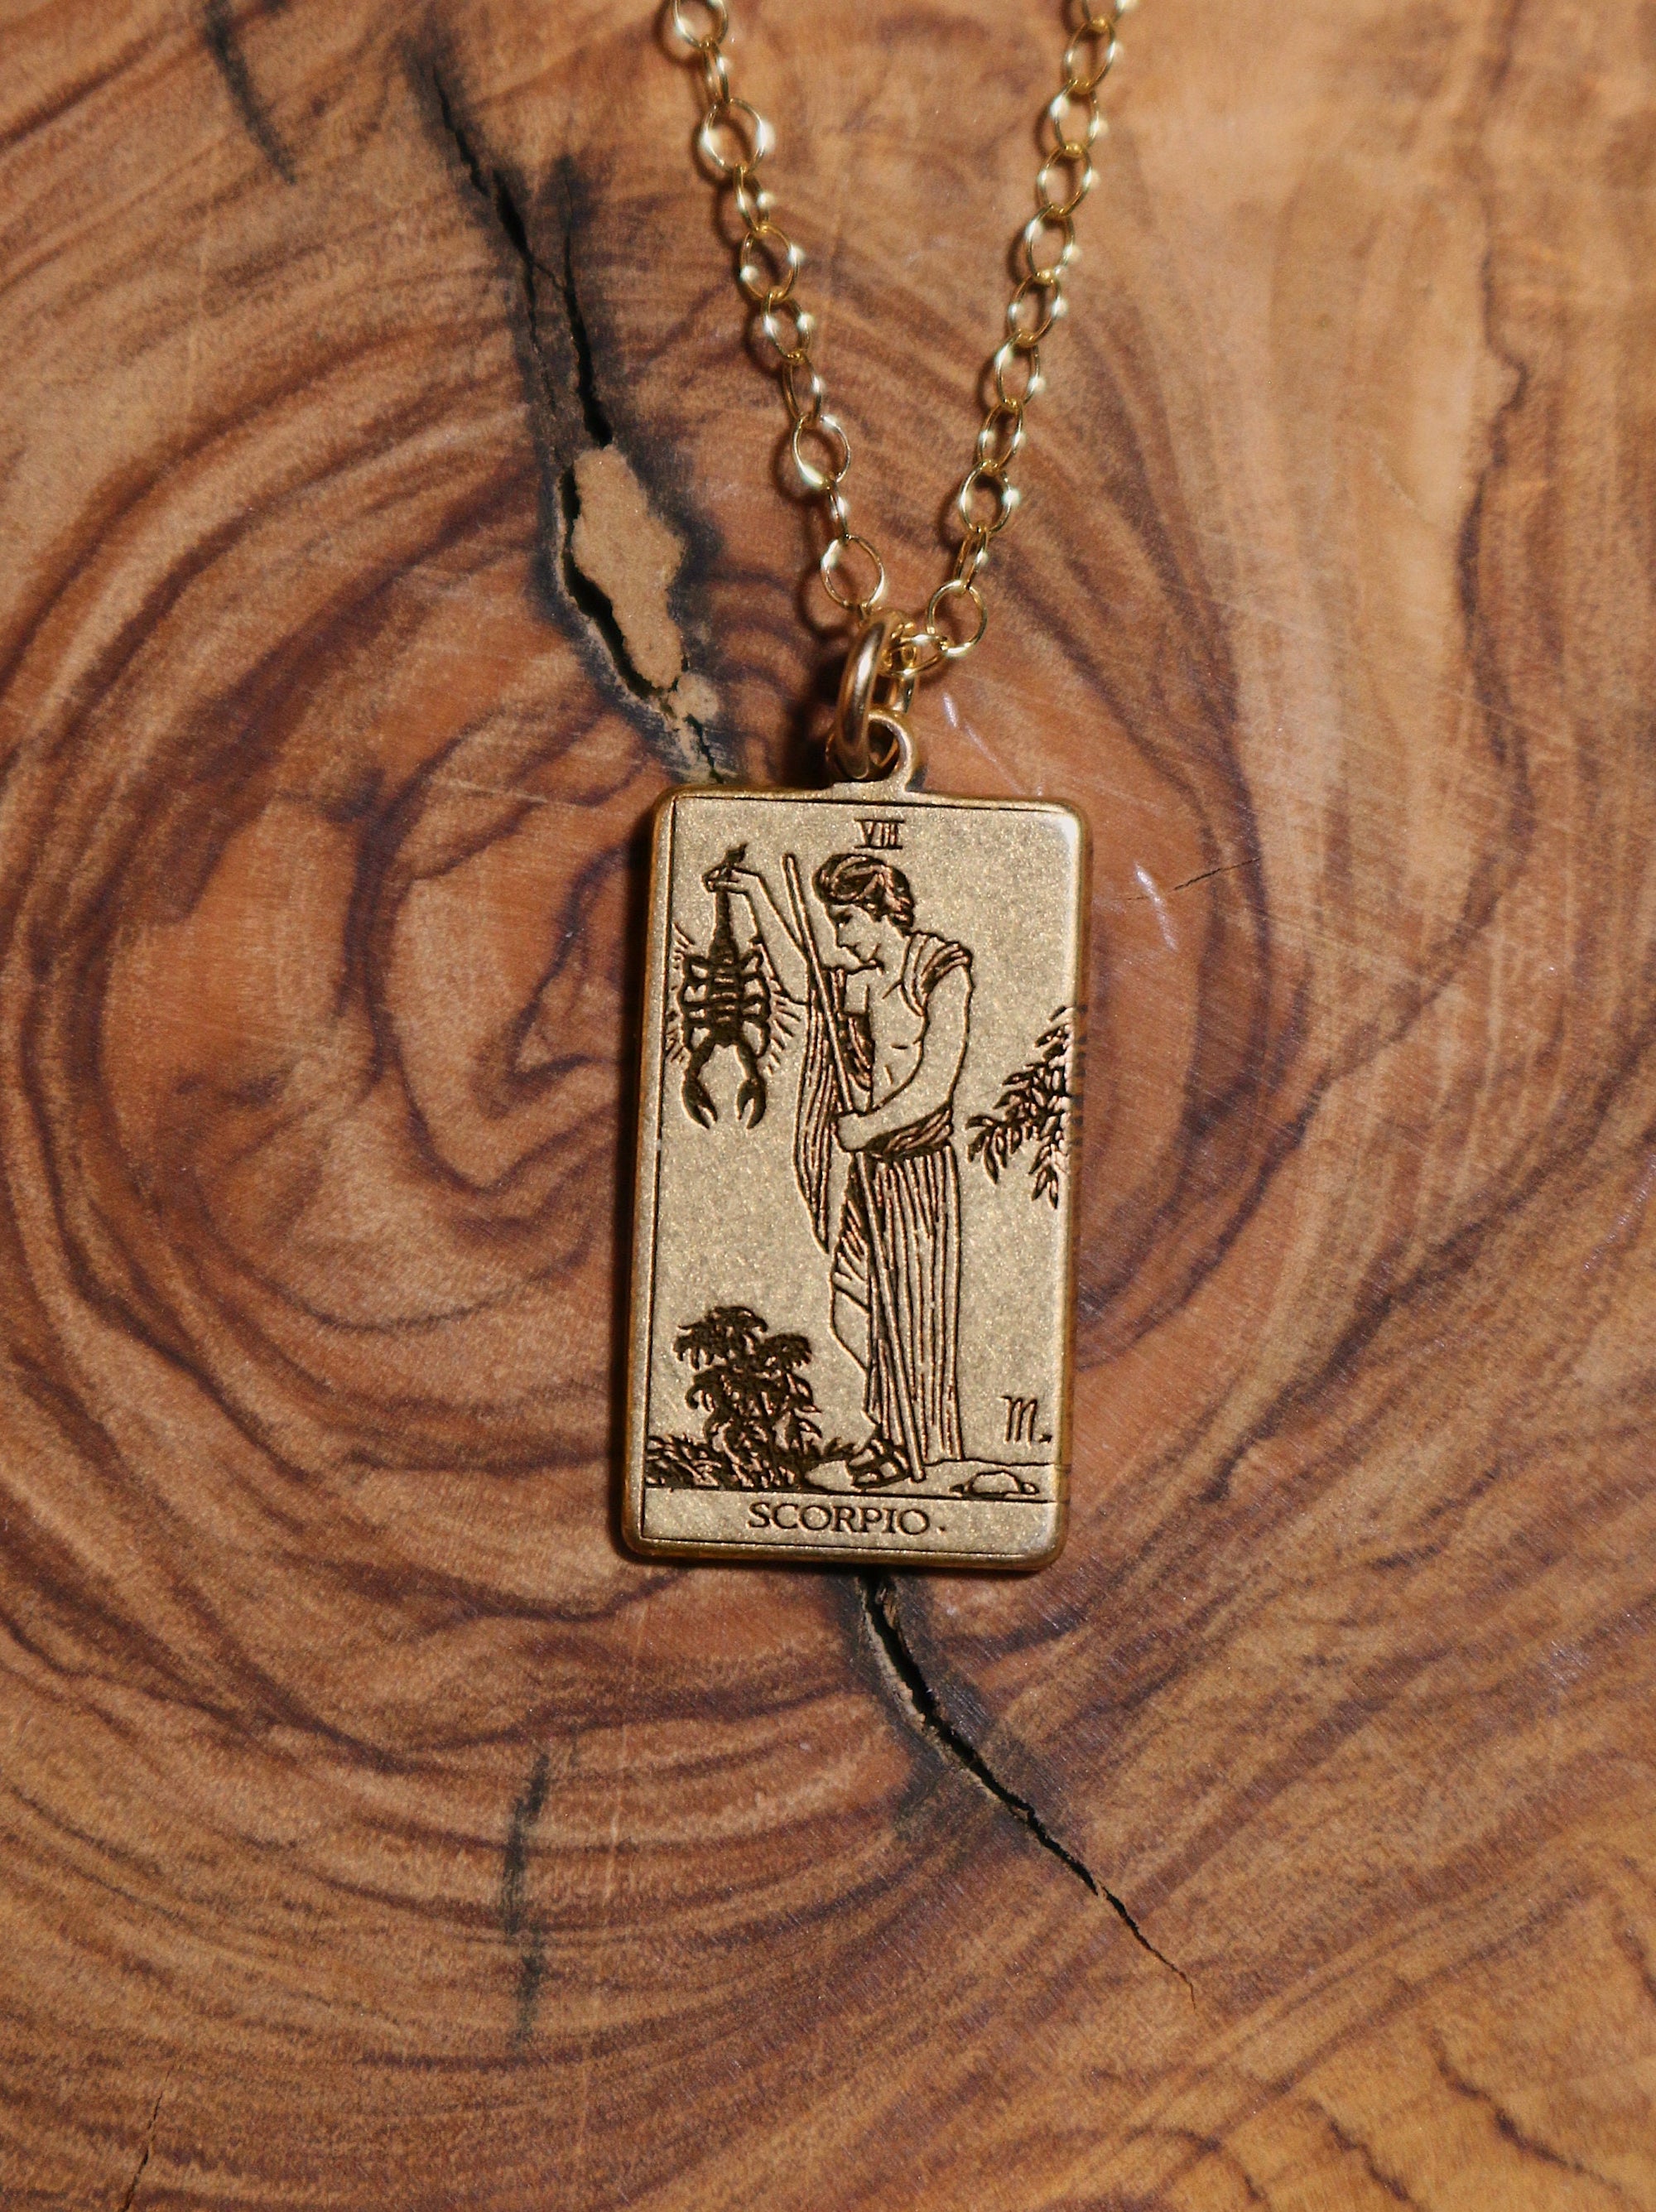 12 ZODIACS: Gold Tarot Card Inspired Zodiac Necklace | Best Friend Gift | Tarot Card Necklace | Celestial Mystic Jewelry | Occult Necklace